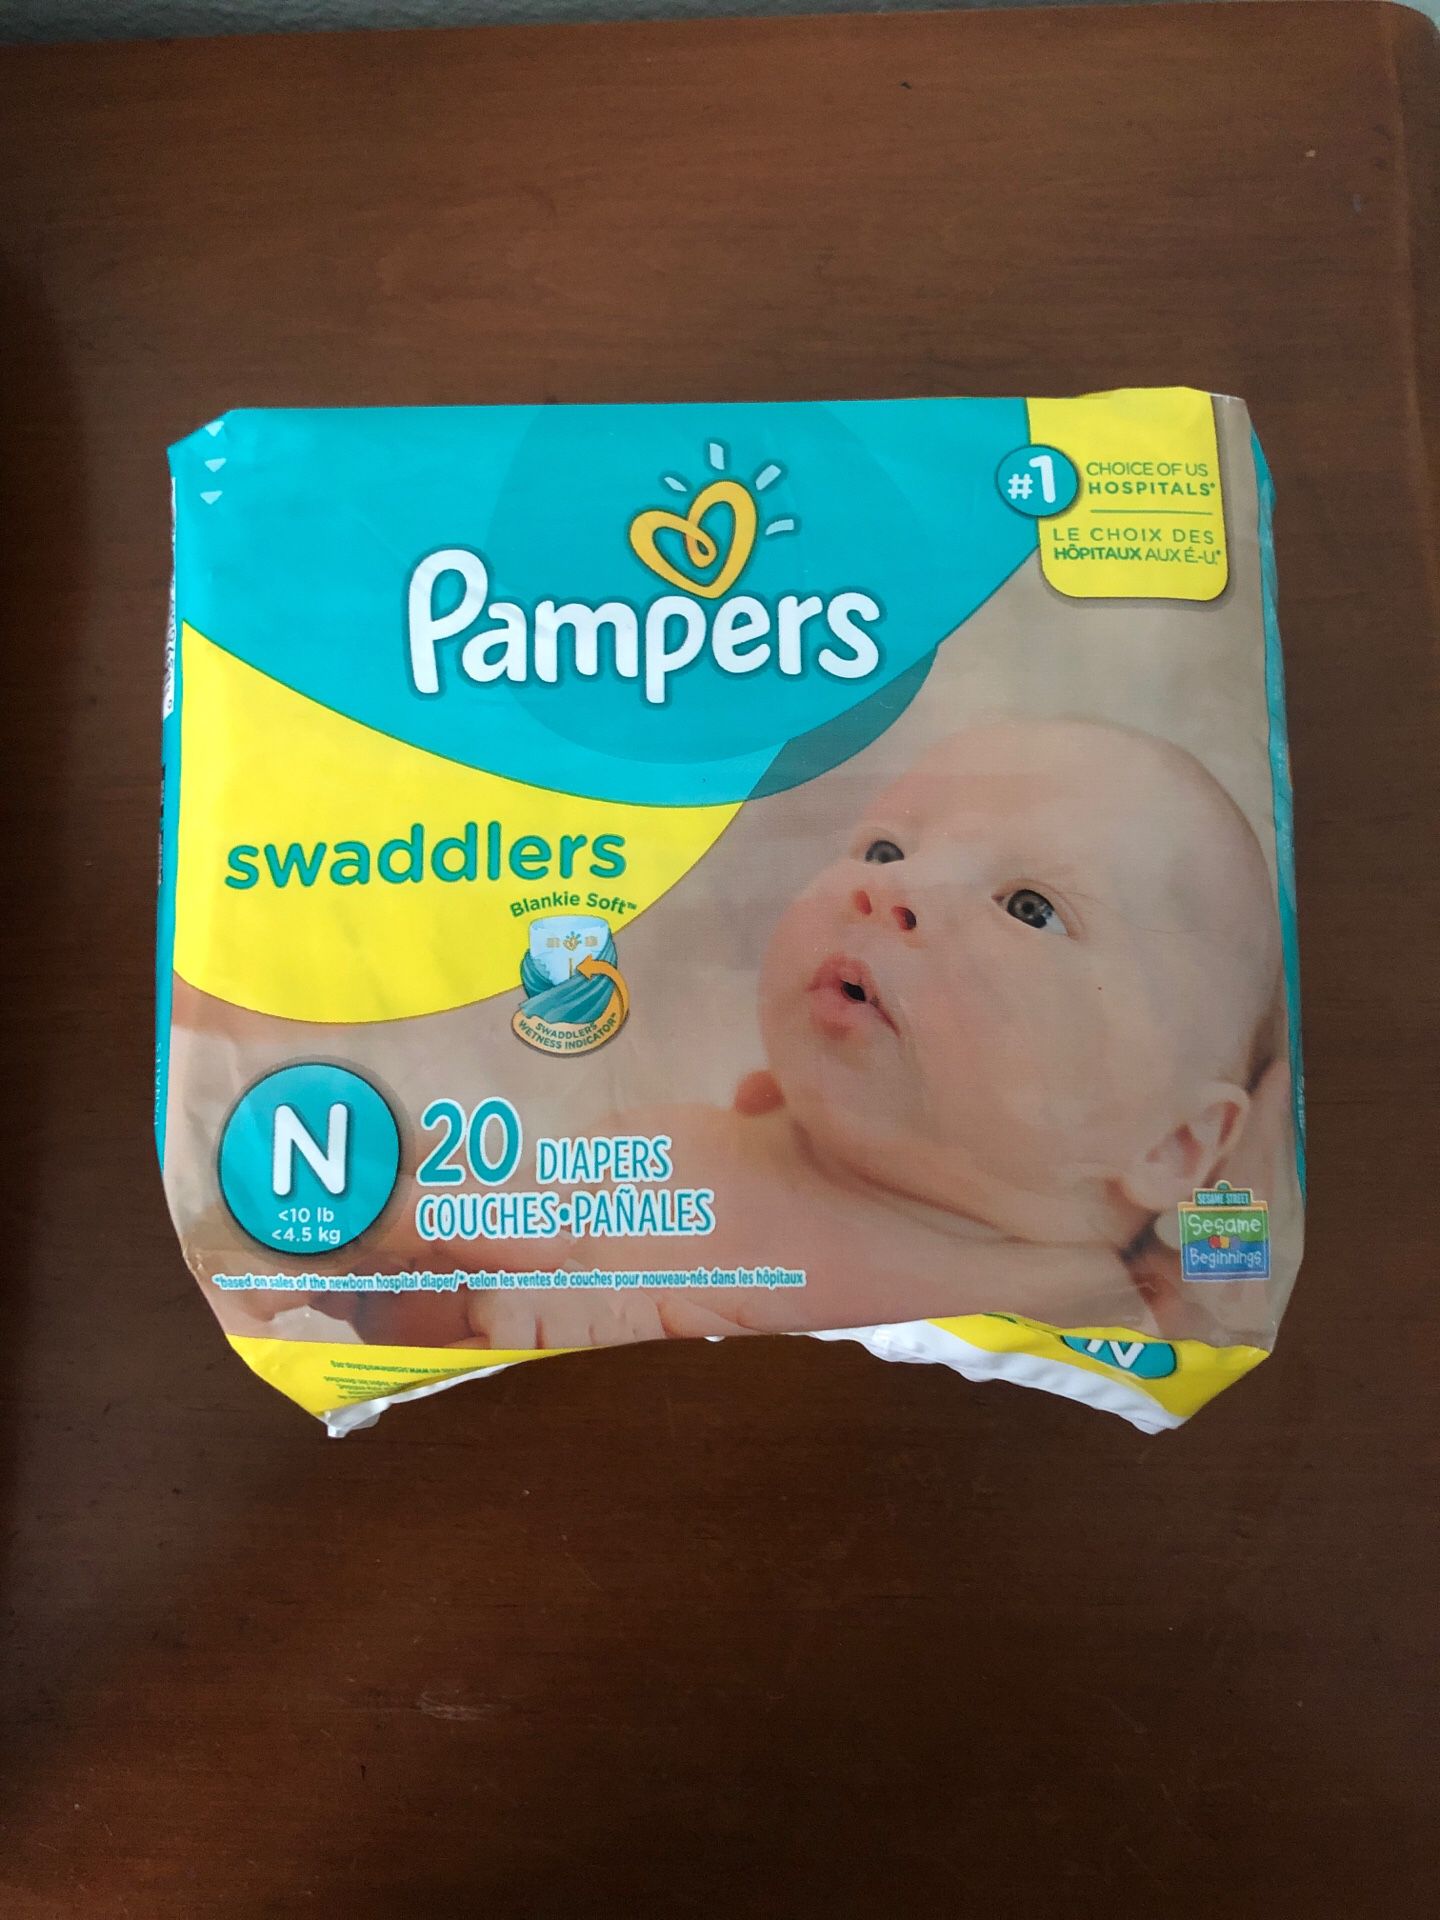 Pampers Swaddlers size Newborn